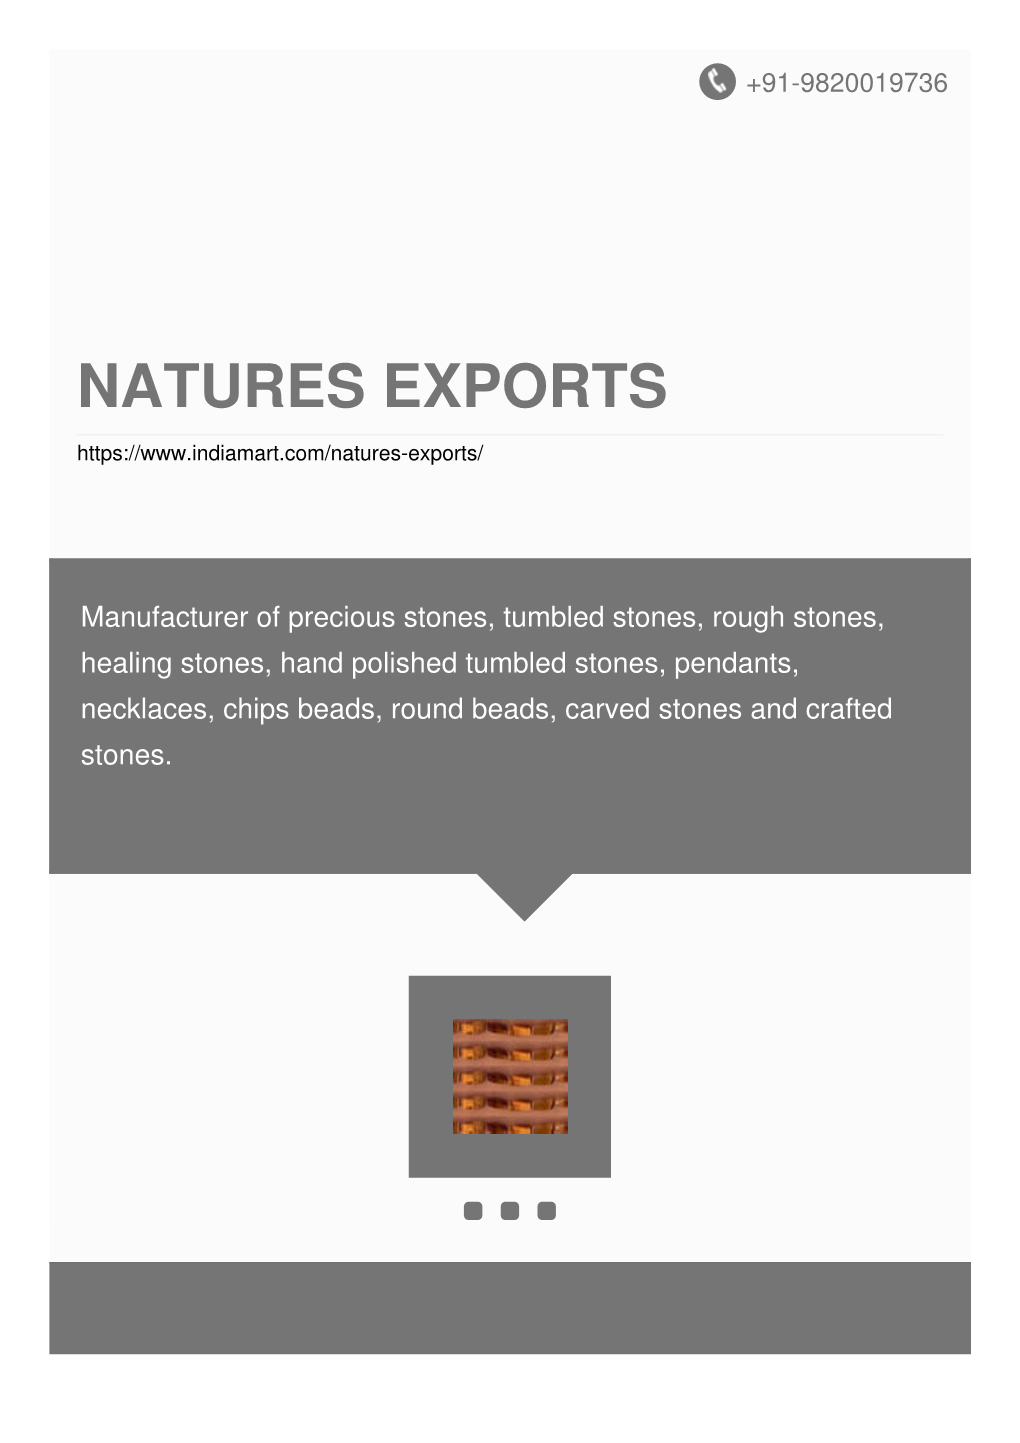 Natures Exports